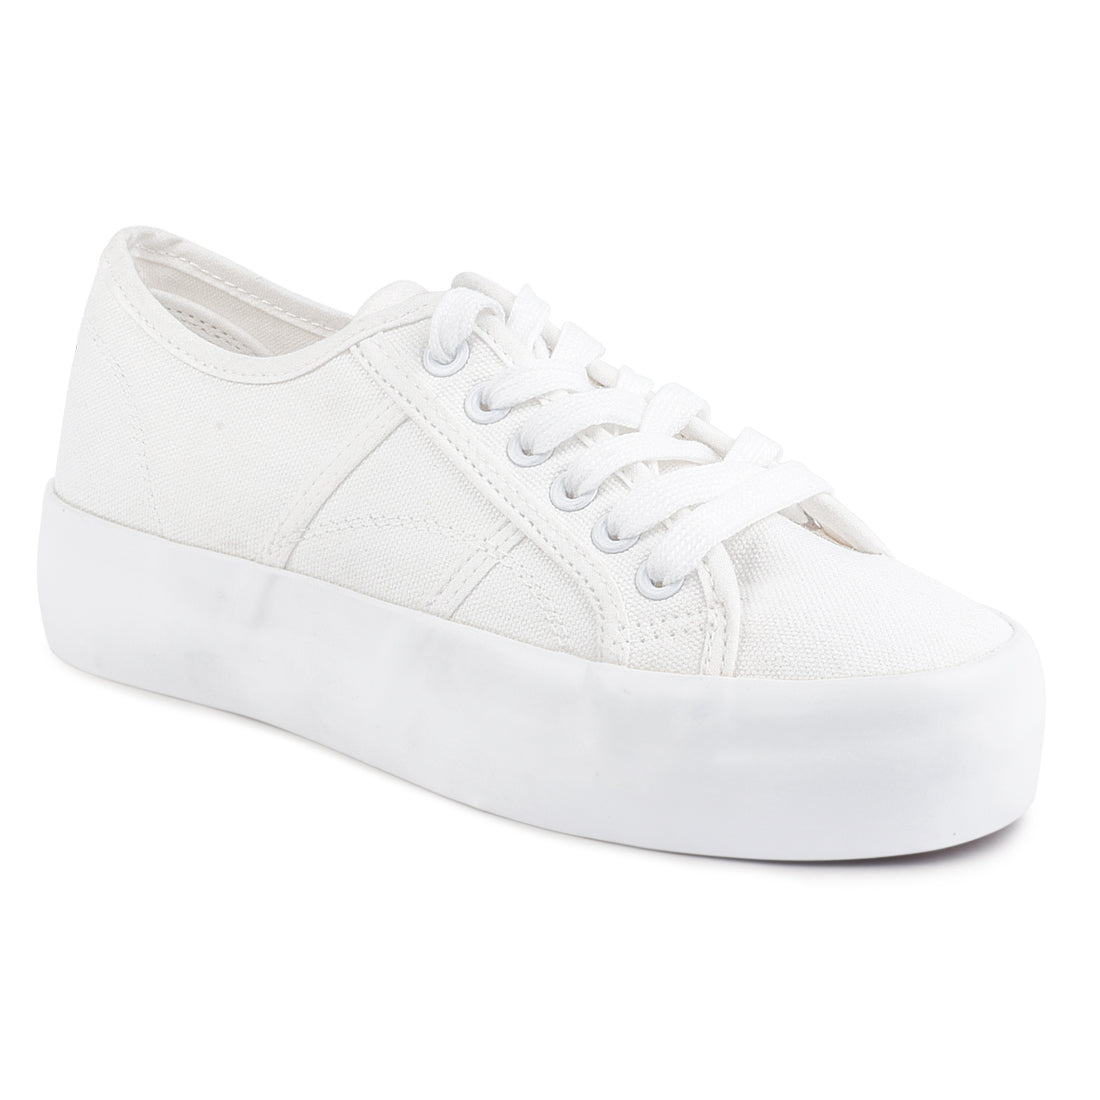 White Solid Platform Lace up Sneakers - White